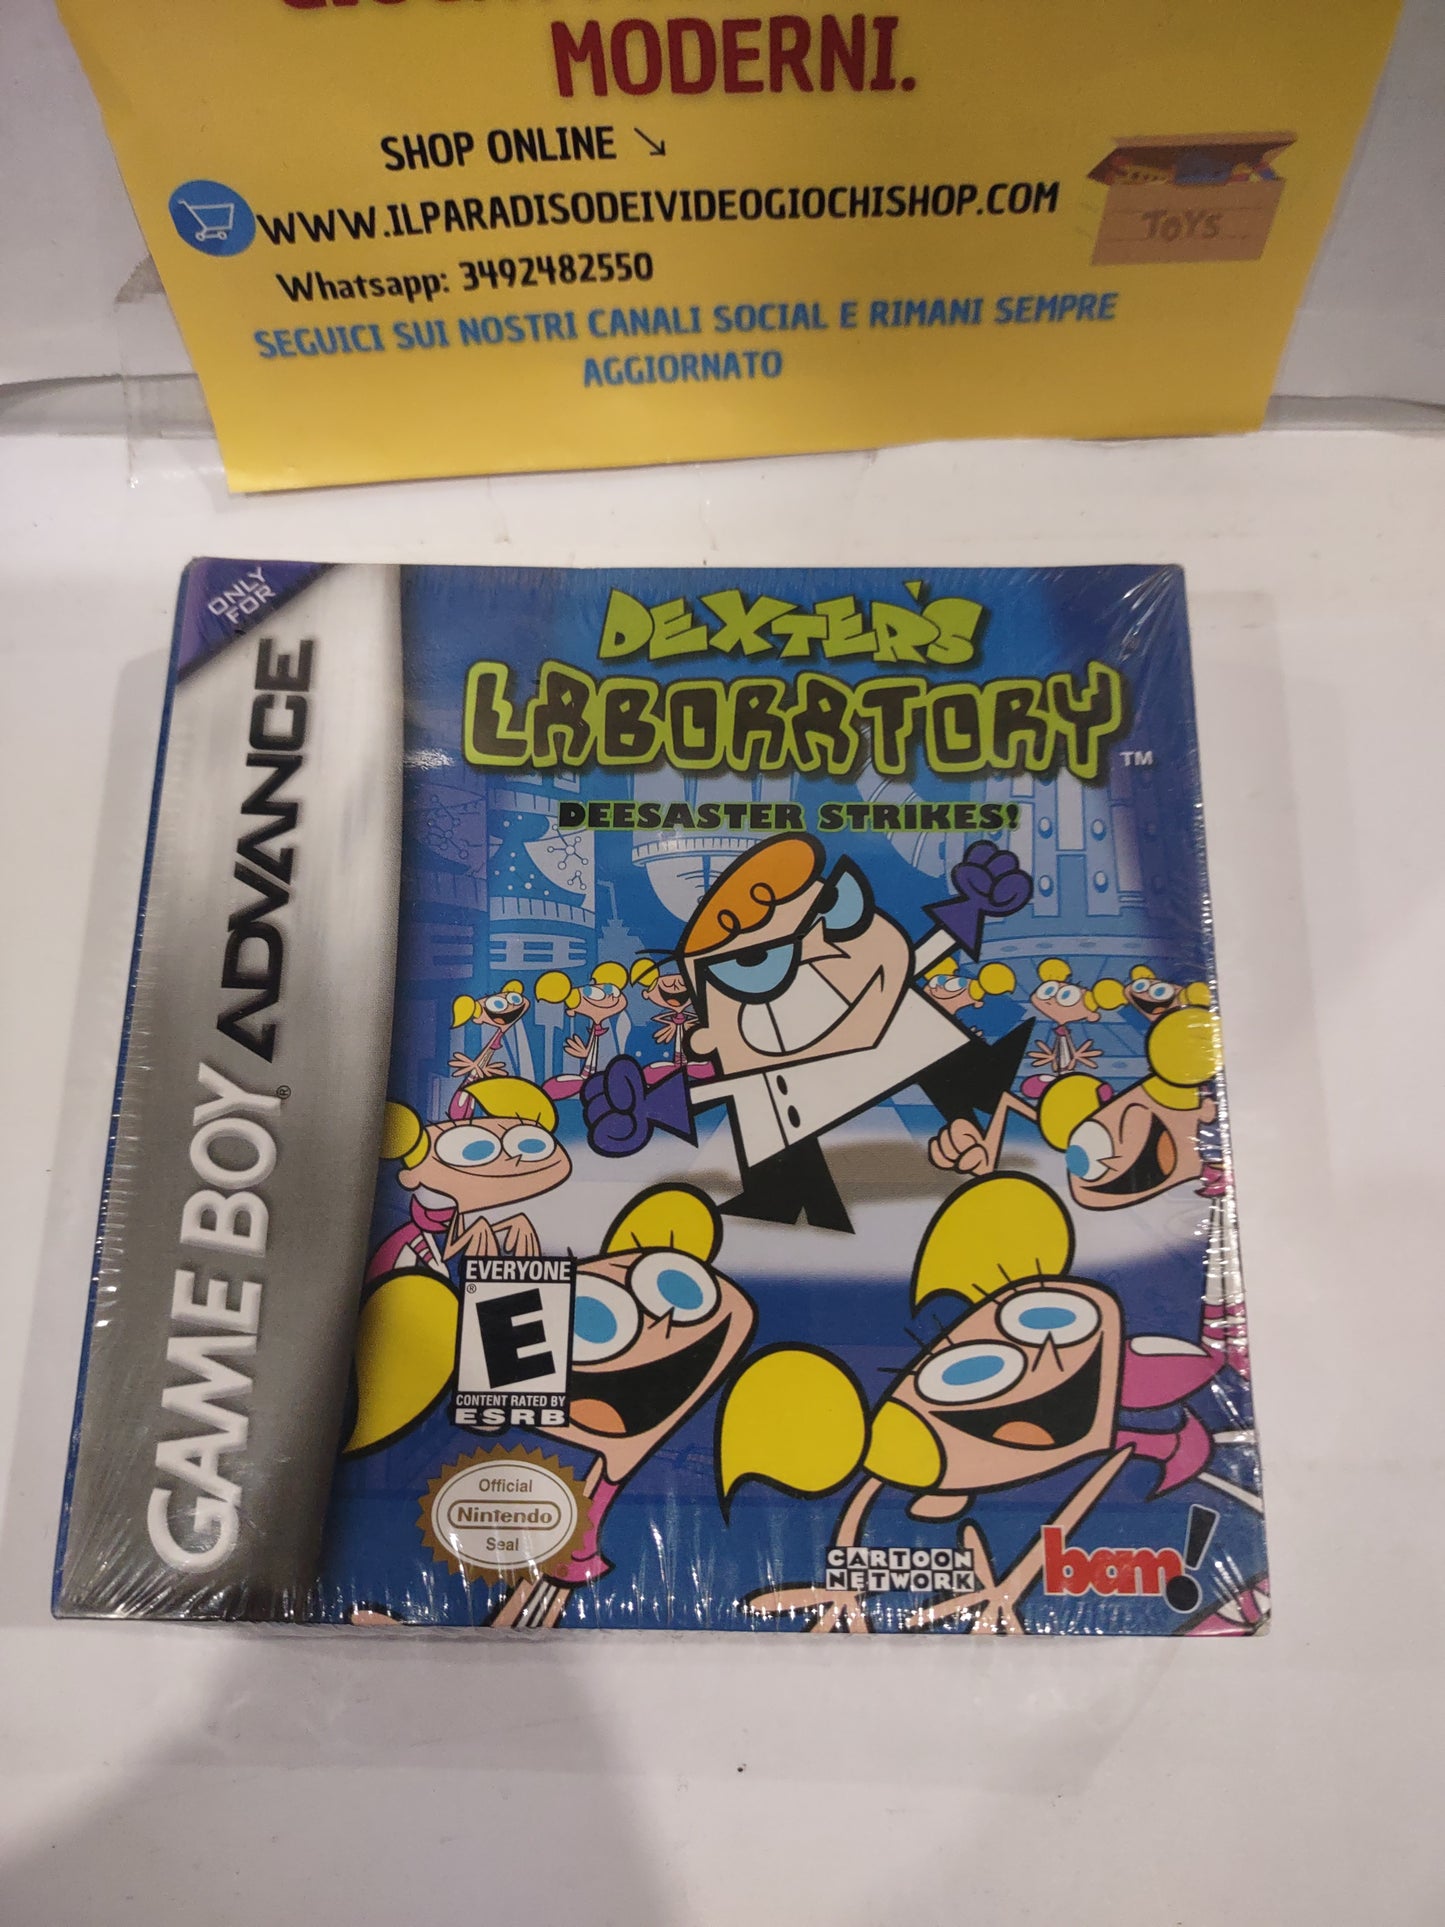 Gioco gba Gameboy Advance dexter's laboratory disaster strikes!